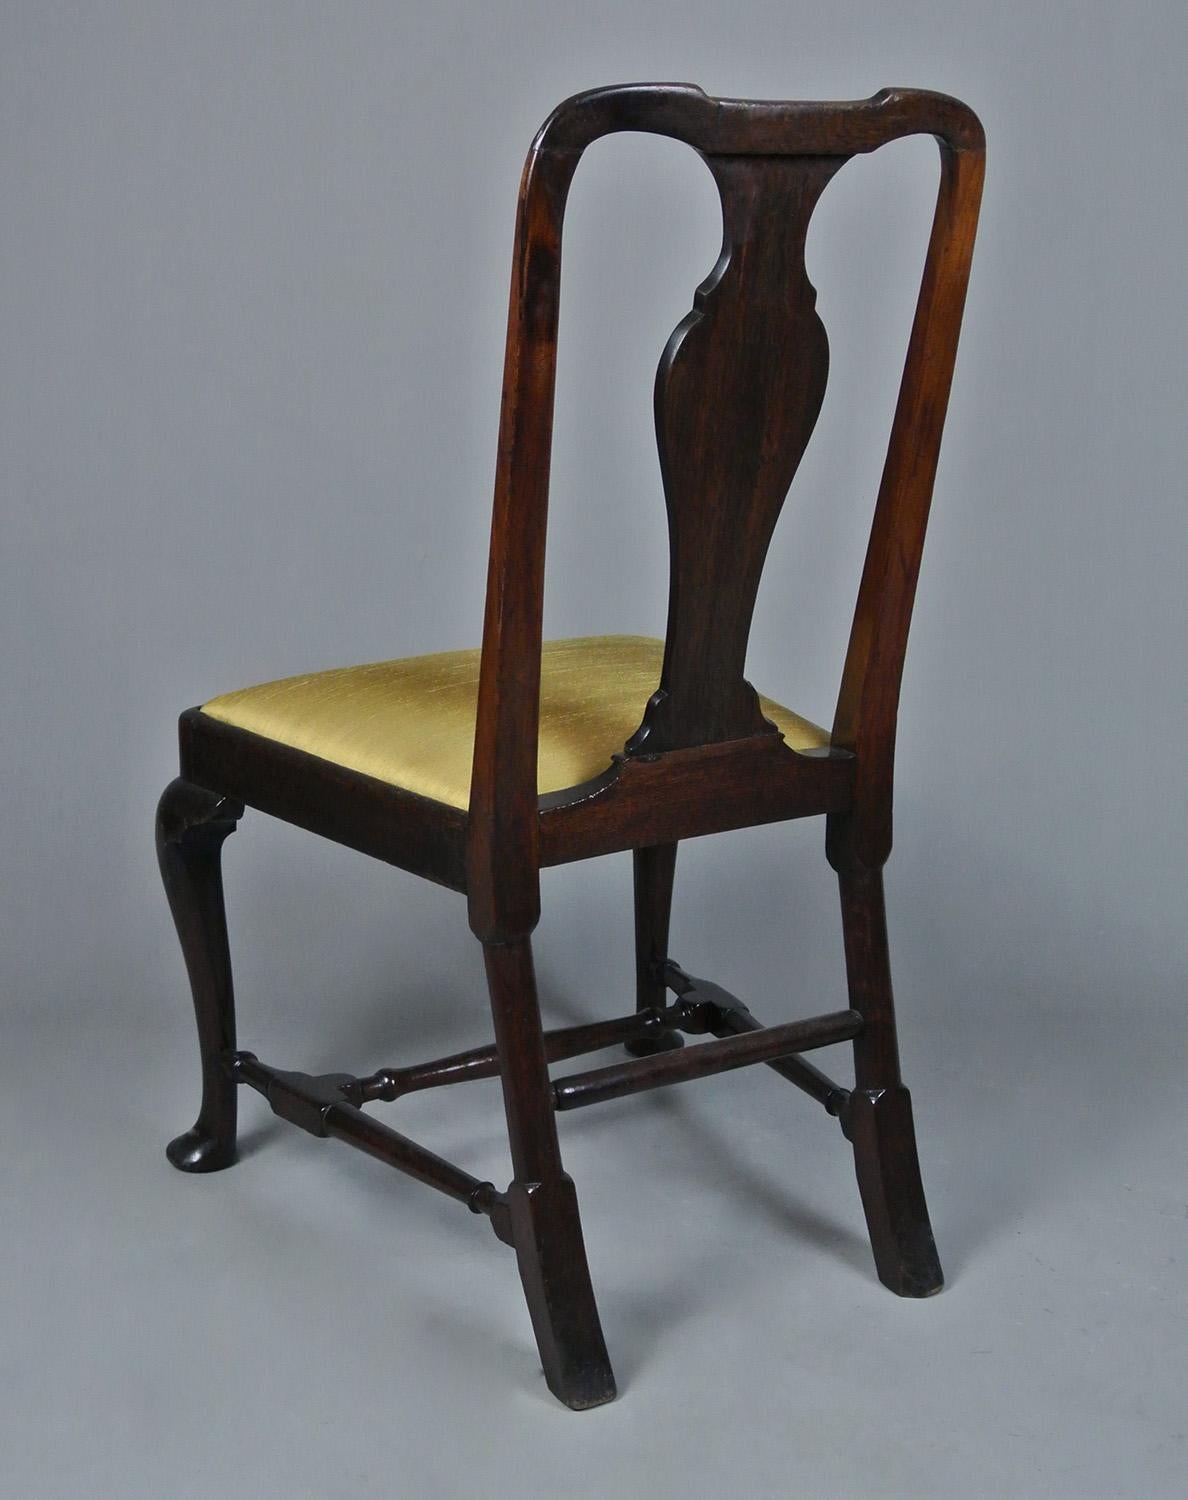 High Quality George II Mahogany Side Chair c. 1740 In Good Condition For Sale In Heathfield, GB